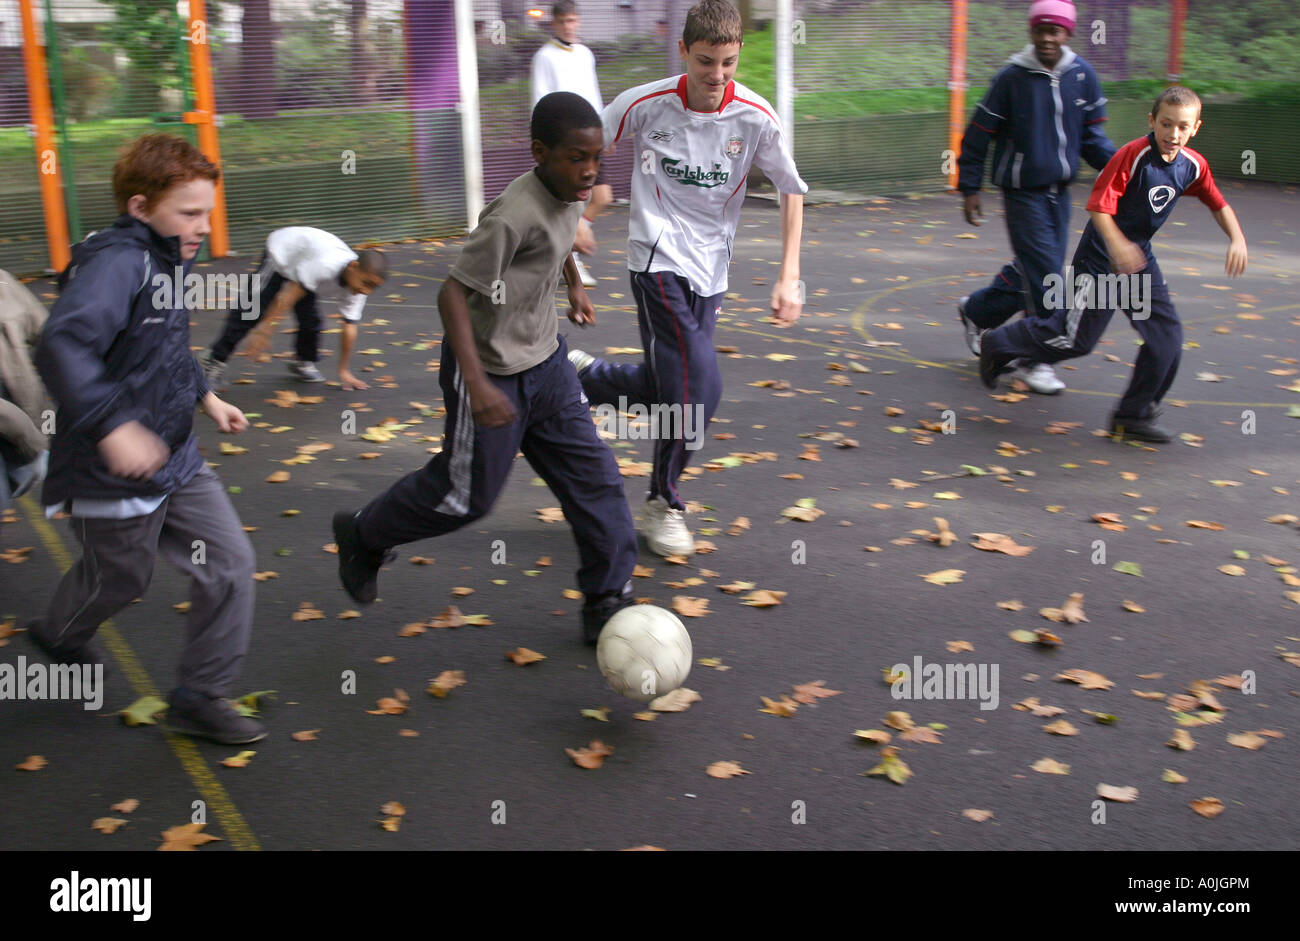 A young afro-caribbean  boy playing soccer with his friends on a housing estate. Stock Photo